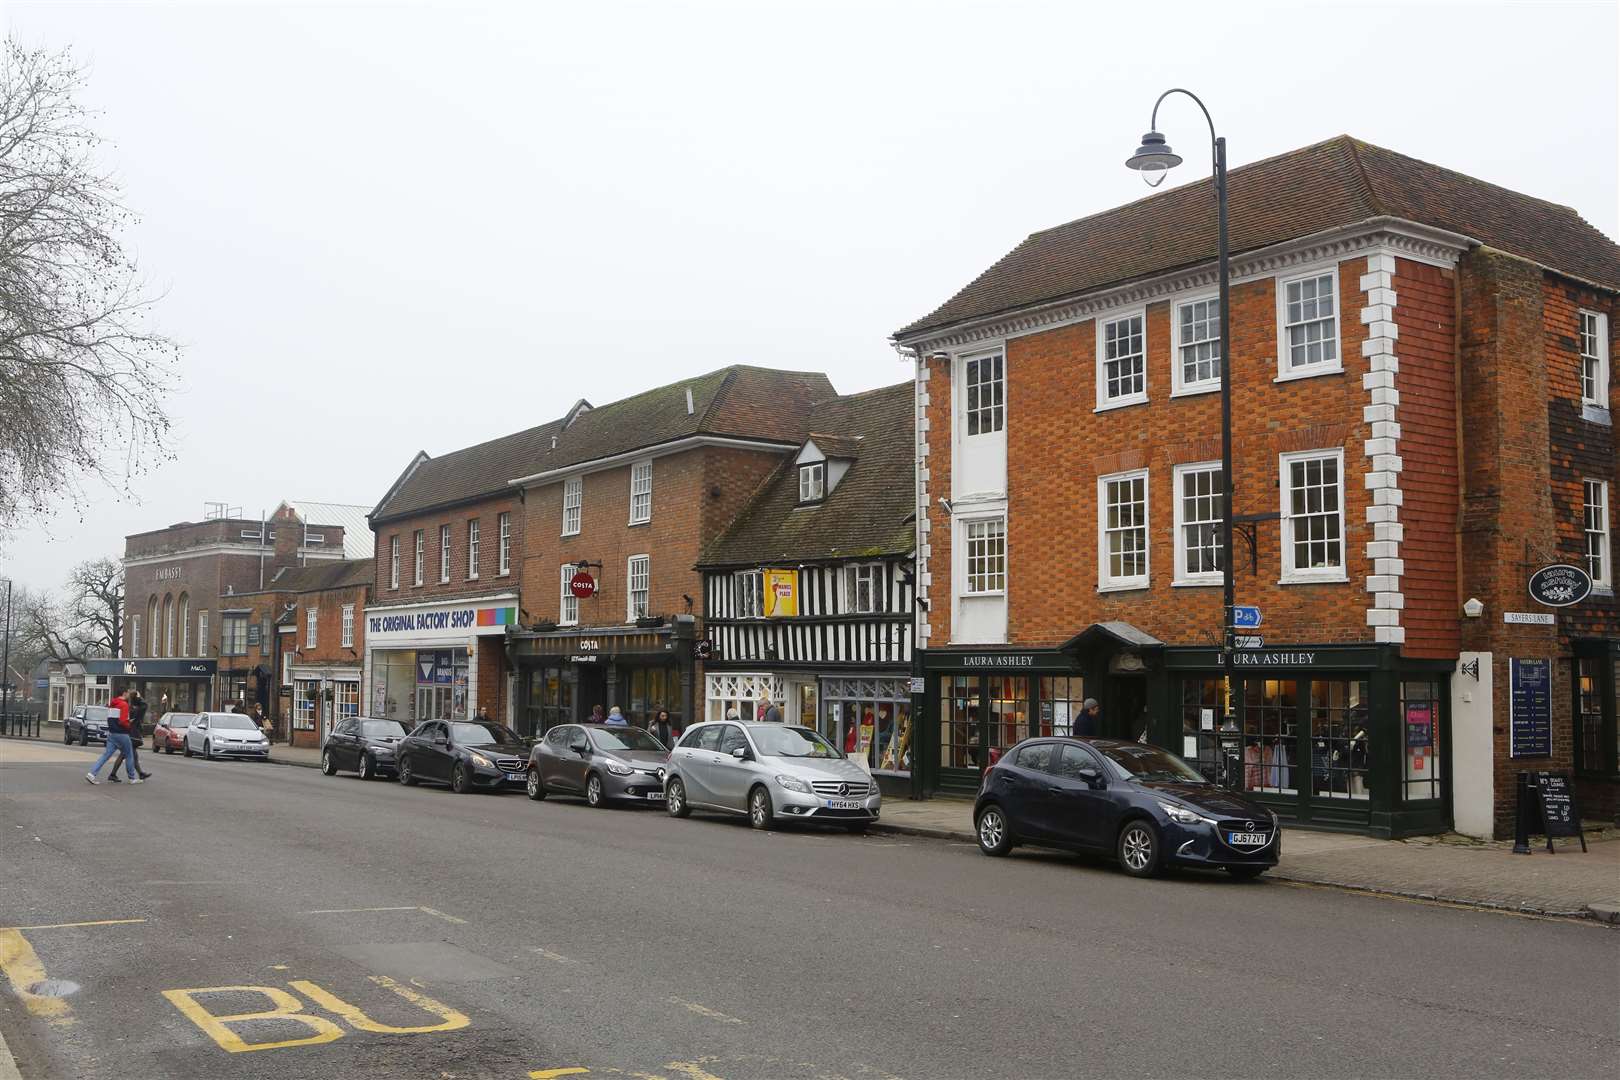 There were no houses available to rent in Tenterden when we checked on Zoopla and Rightmove